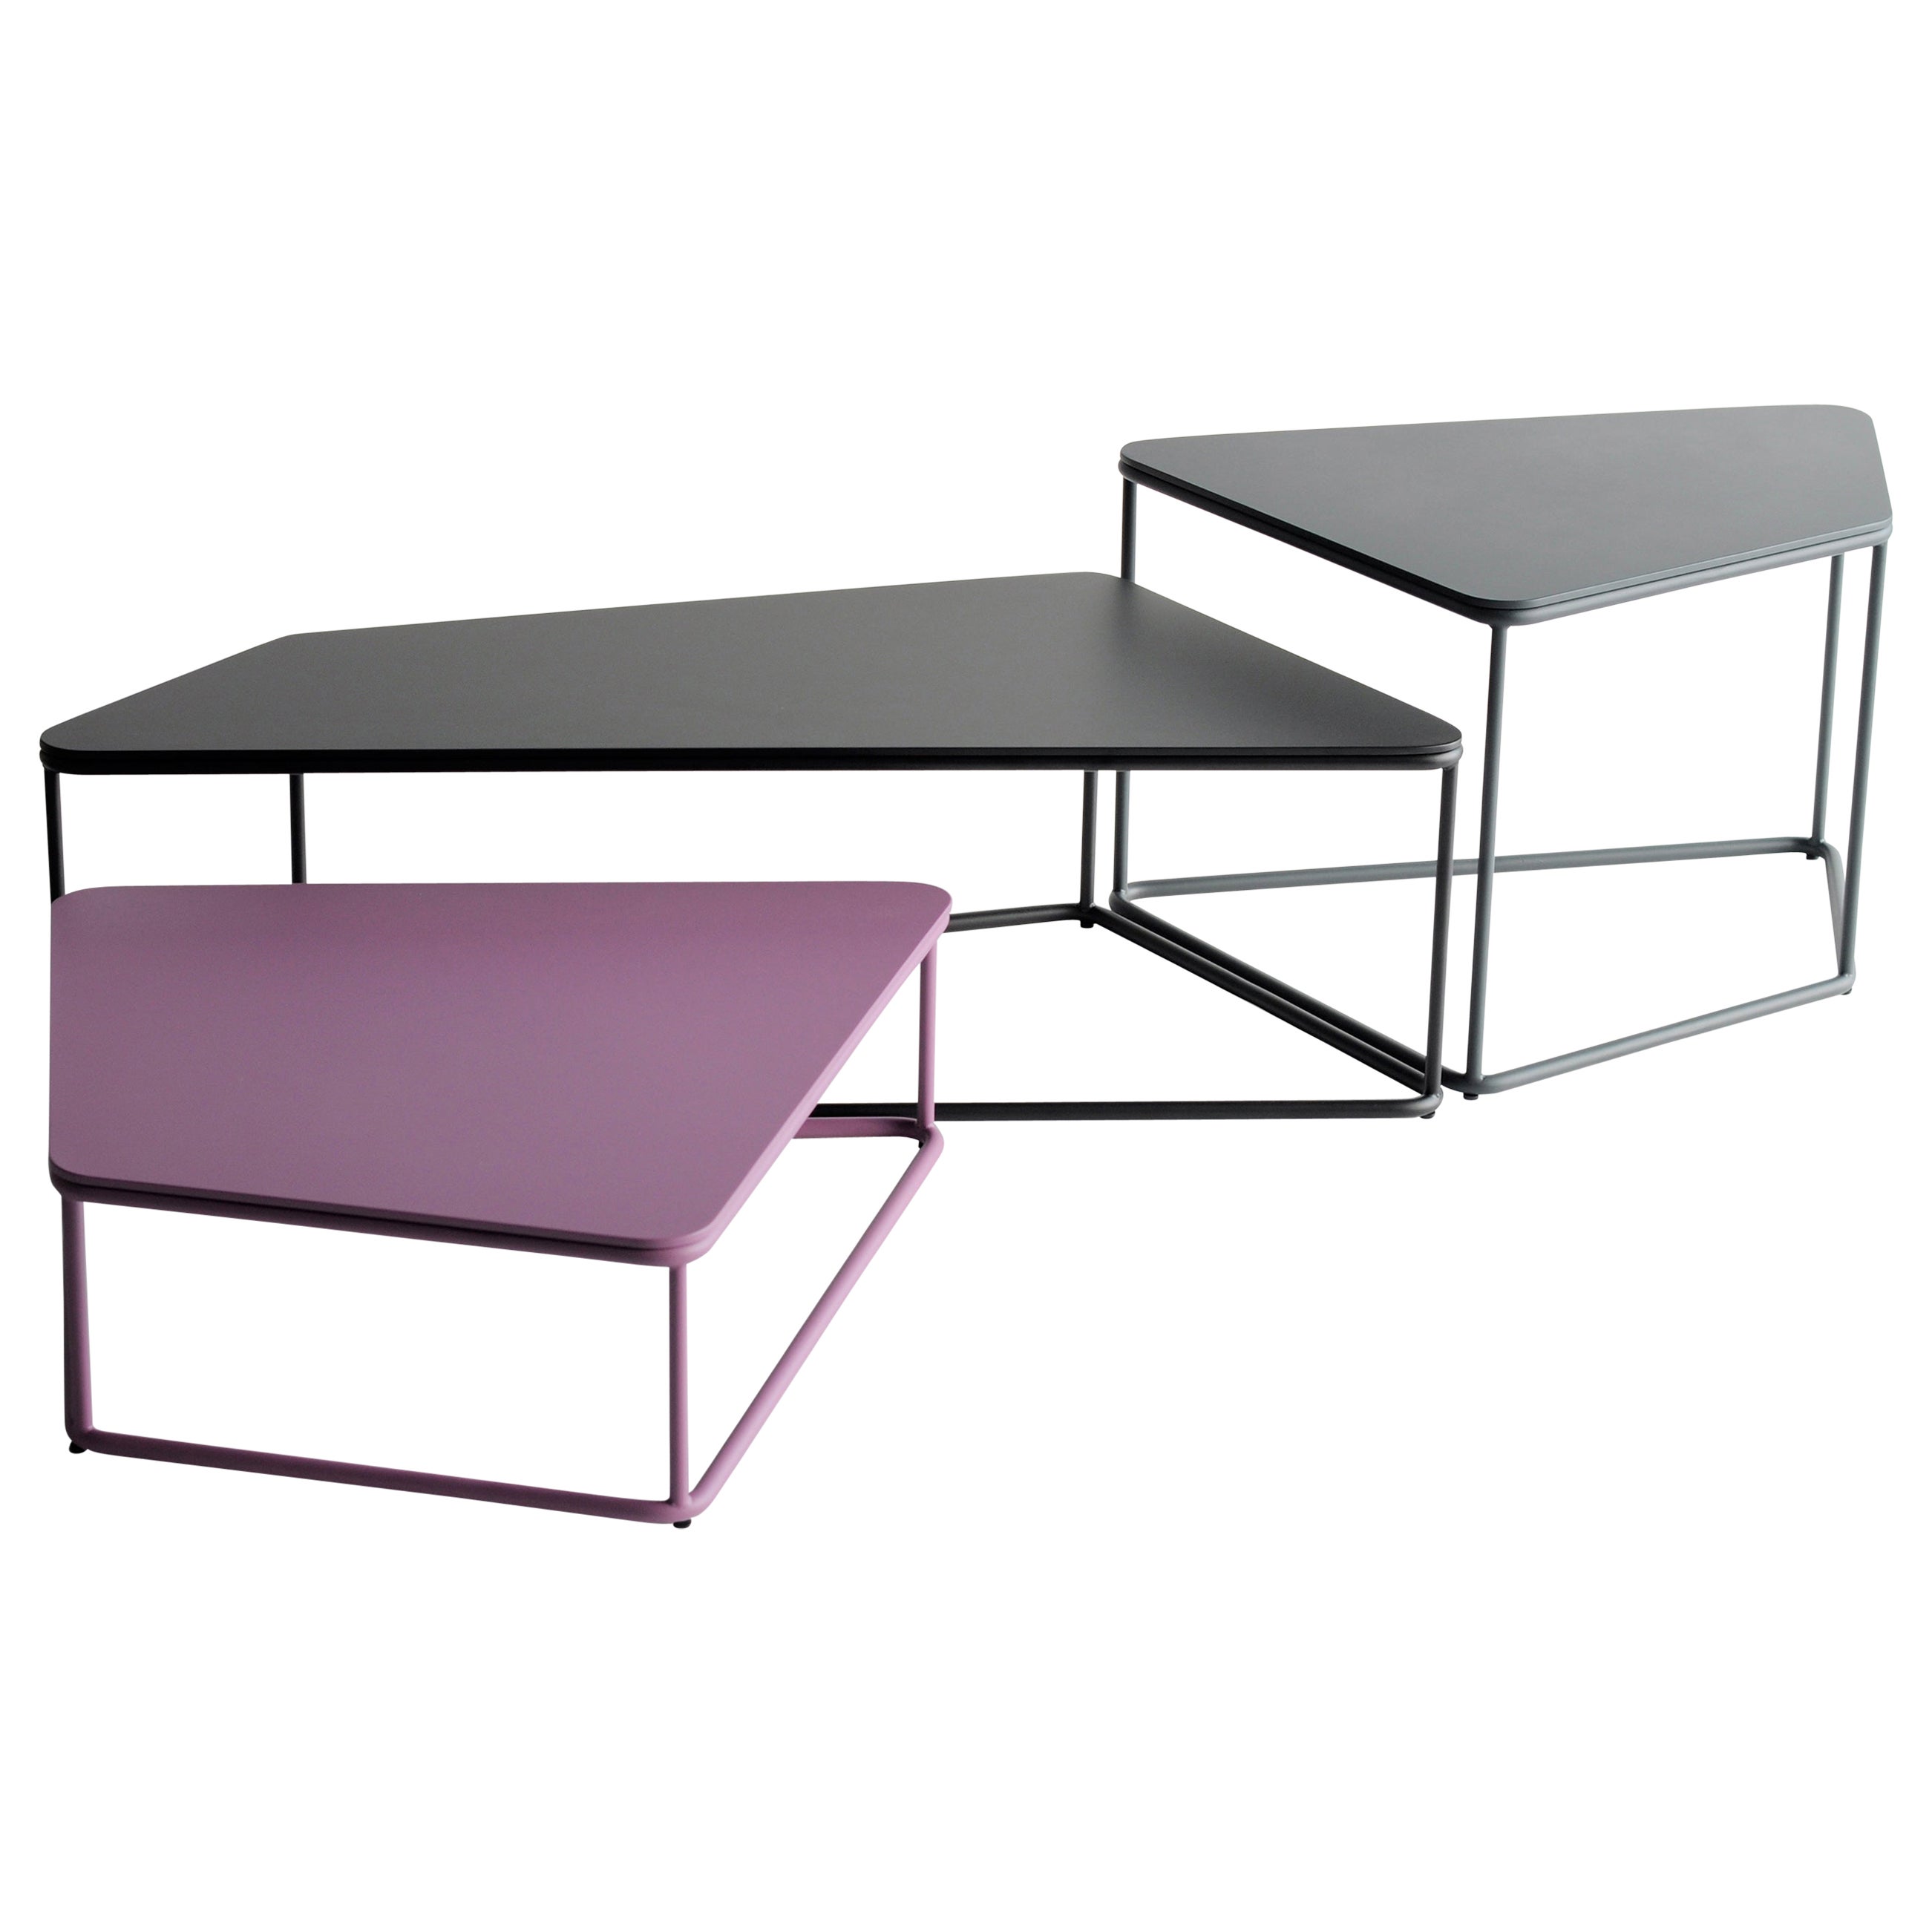 Set Of 3 Pangaea Tables by Phase Design